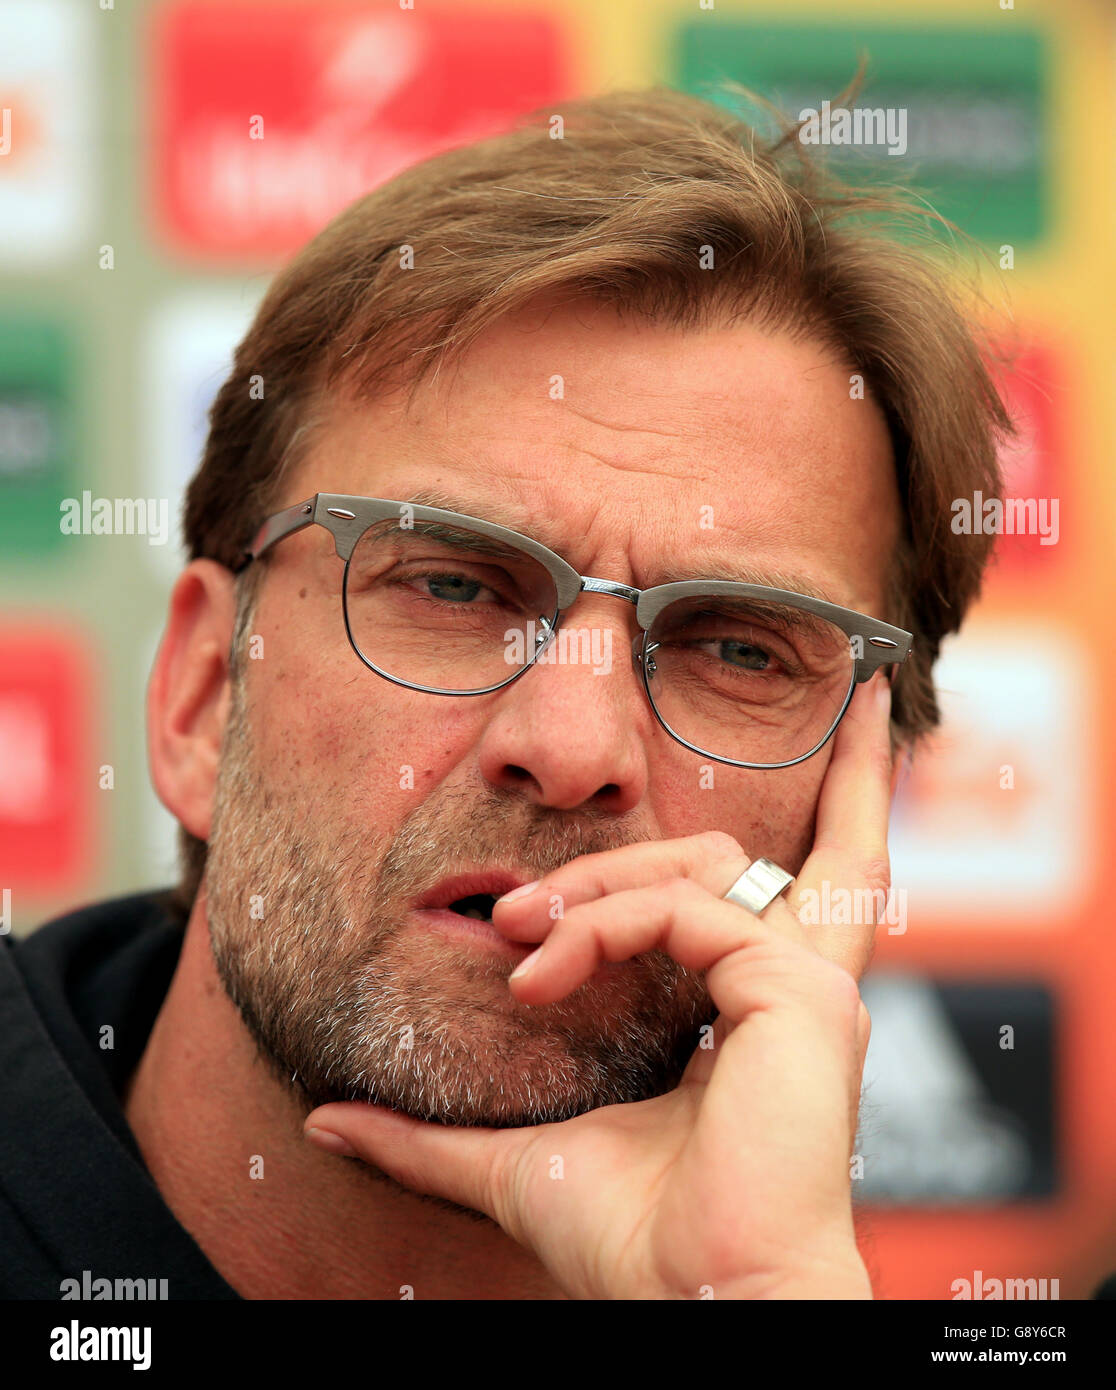 Liverpool manager Jurgen Klopp during a press conference at Melwood Training Ground, Liverpool. Stock Photo